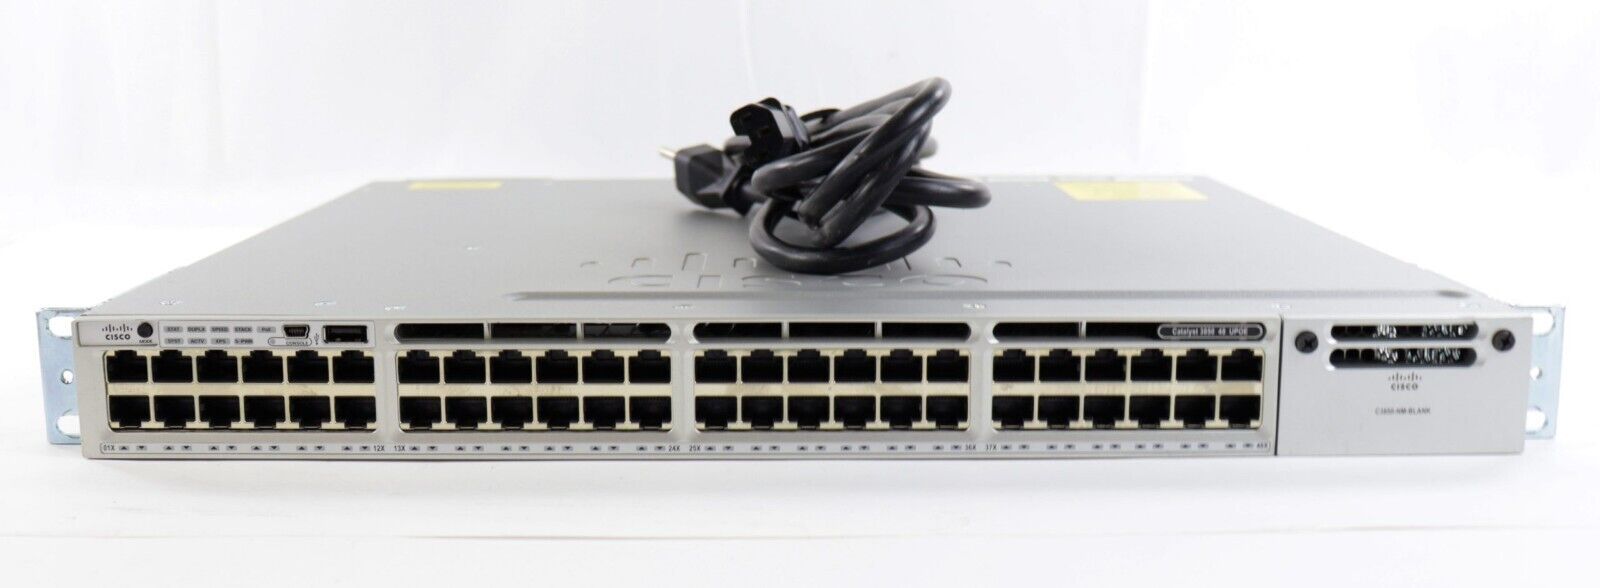 Cisco Catalyst 3850 48 PoE+ Ethernet Switch P/N: WS-C3850-48F-E Tested Working